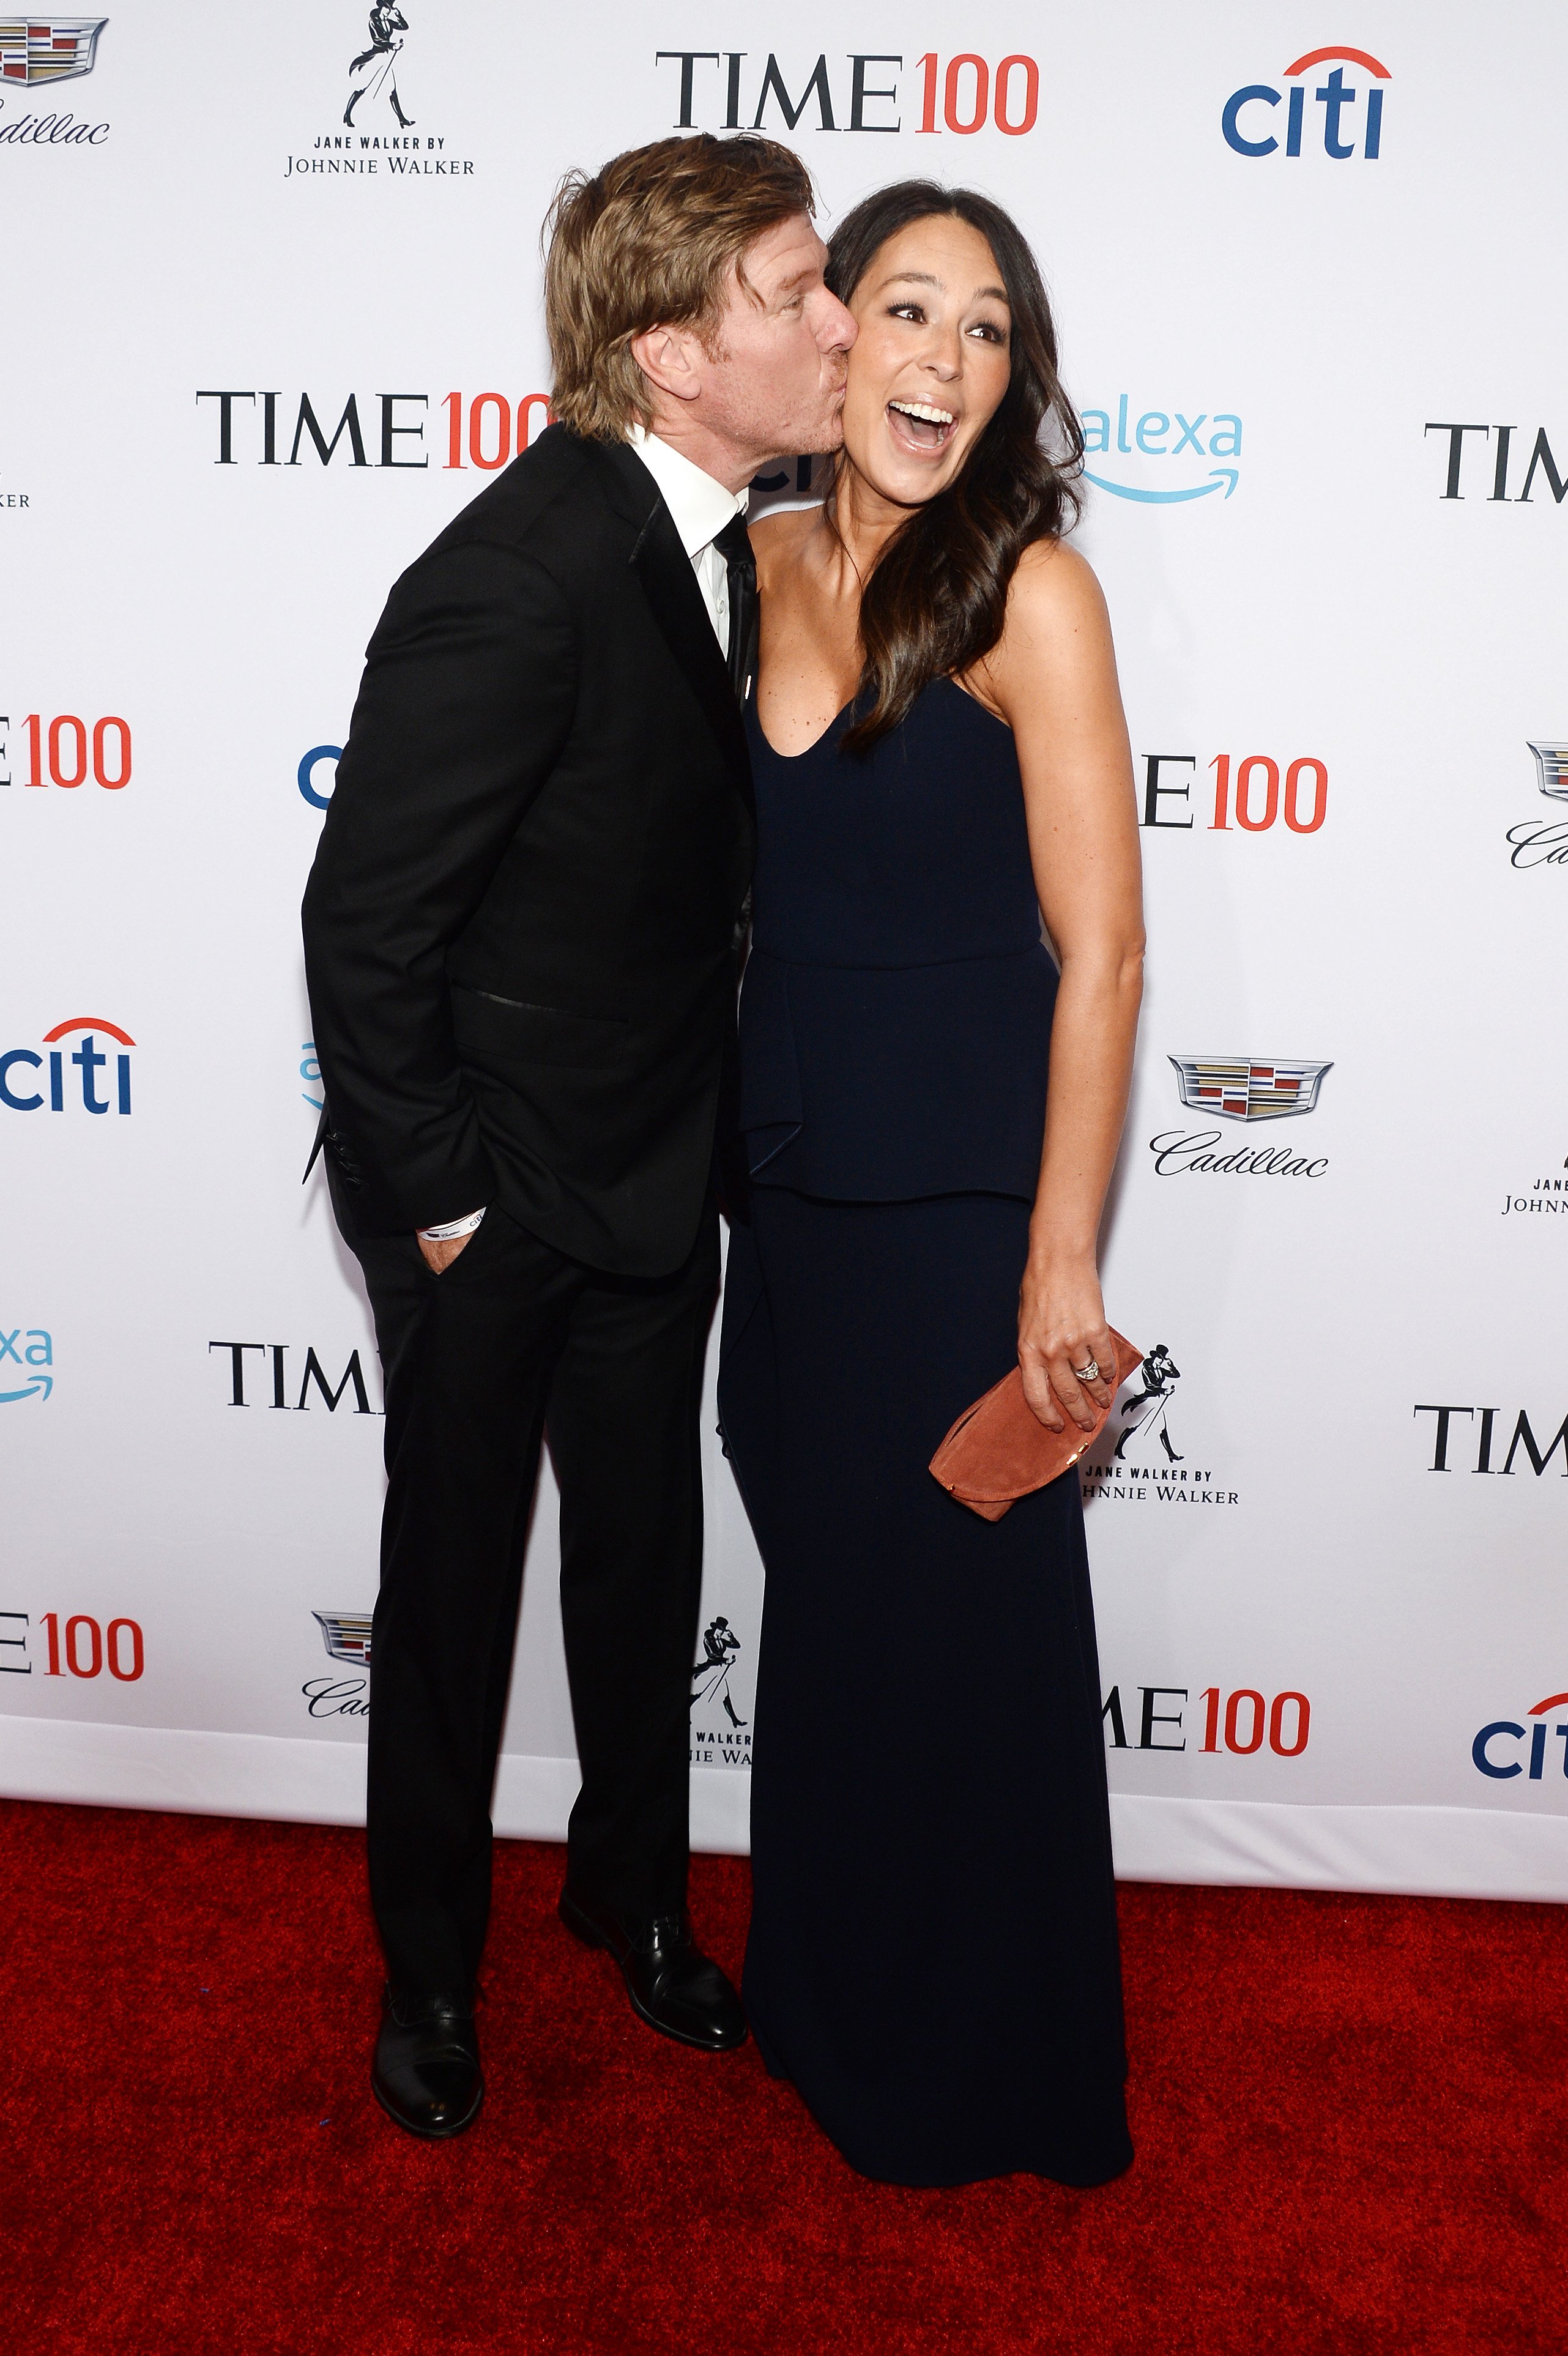 Chip Gaines and Joanna Gaines attend the TIME 100 Gala 2019 Lobby Arrivals at Jazz on April 23, 2019, in New York City. | Source: Getty Images.